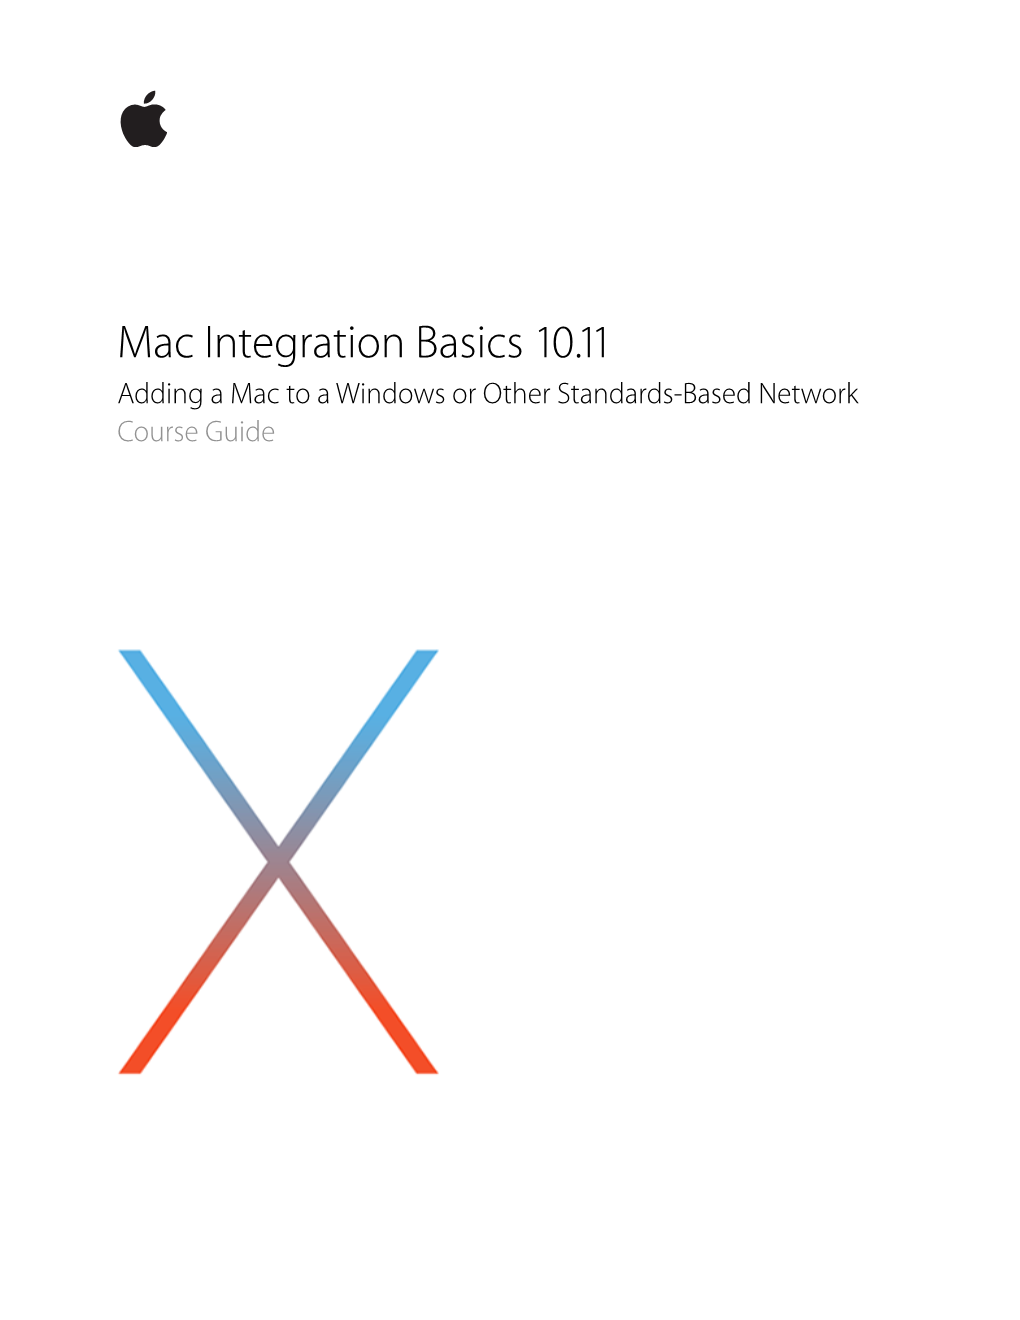 Mac Integration Basics 10.11 Adding a Mac to a Windows Or Other Standards-Based Network Course Guide Contents